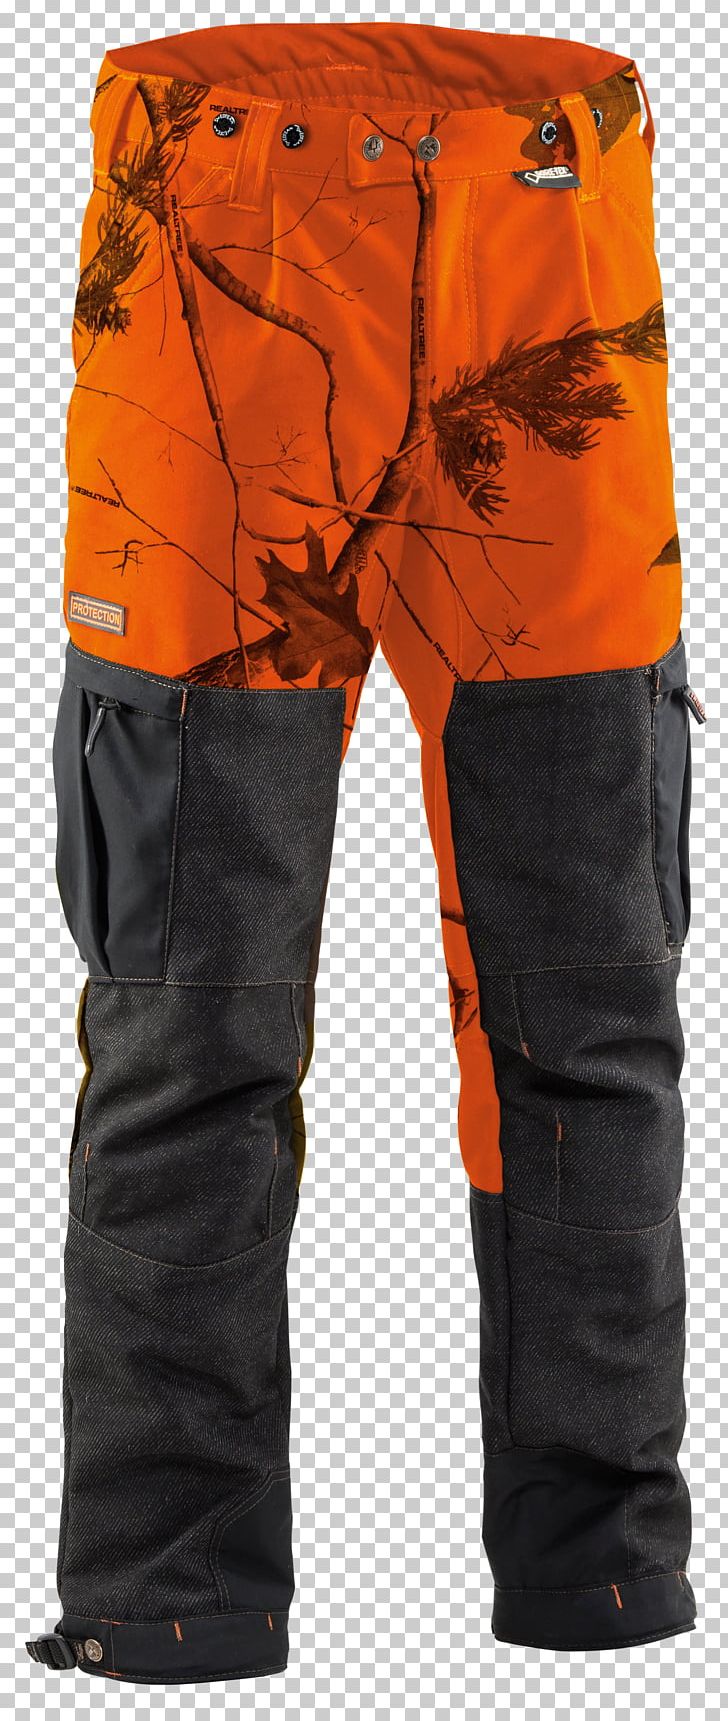 Pants Lining Gore-Tex Hunting PNG, Clipart, Blaze, Clothing, Crotch, Goretex, Hunting Free PNG Download